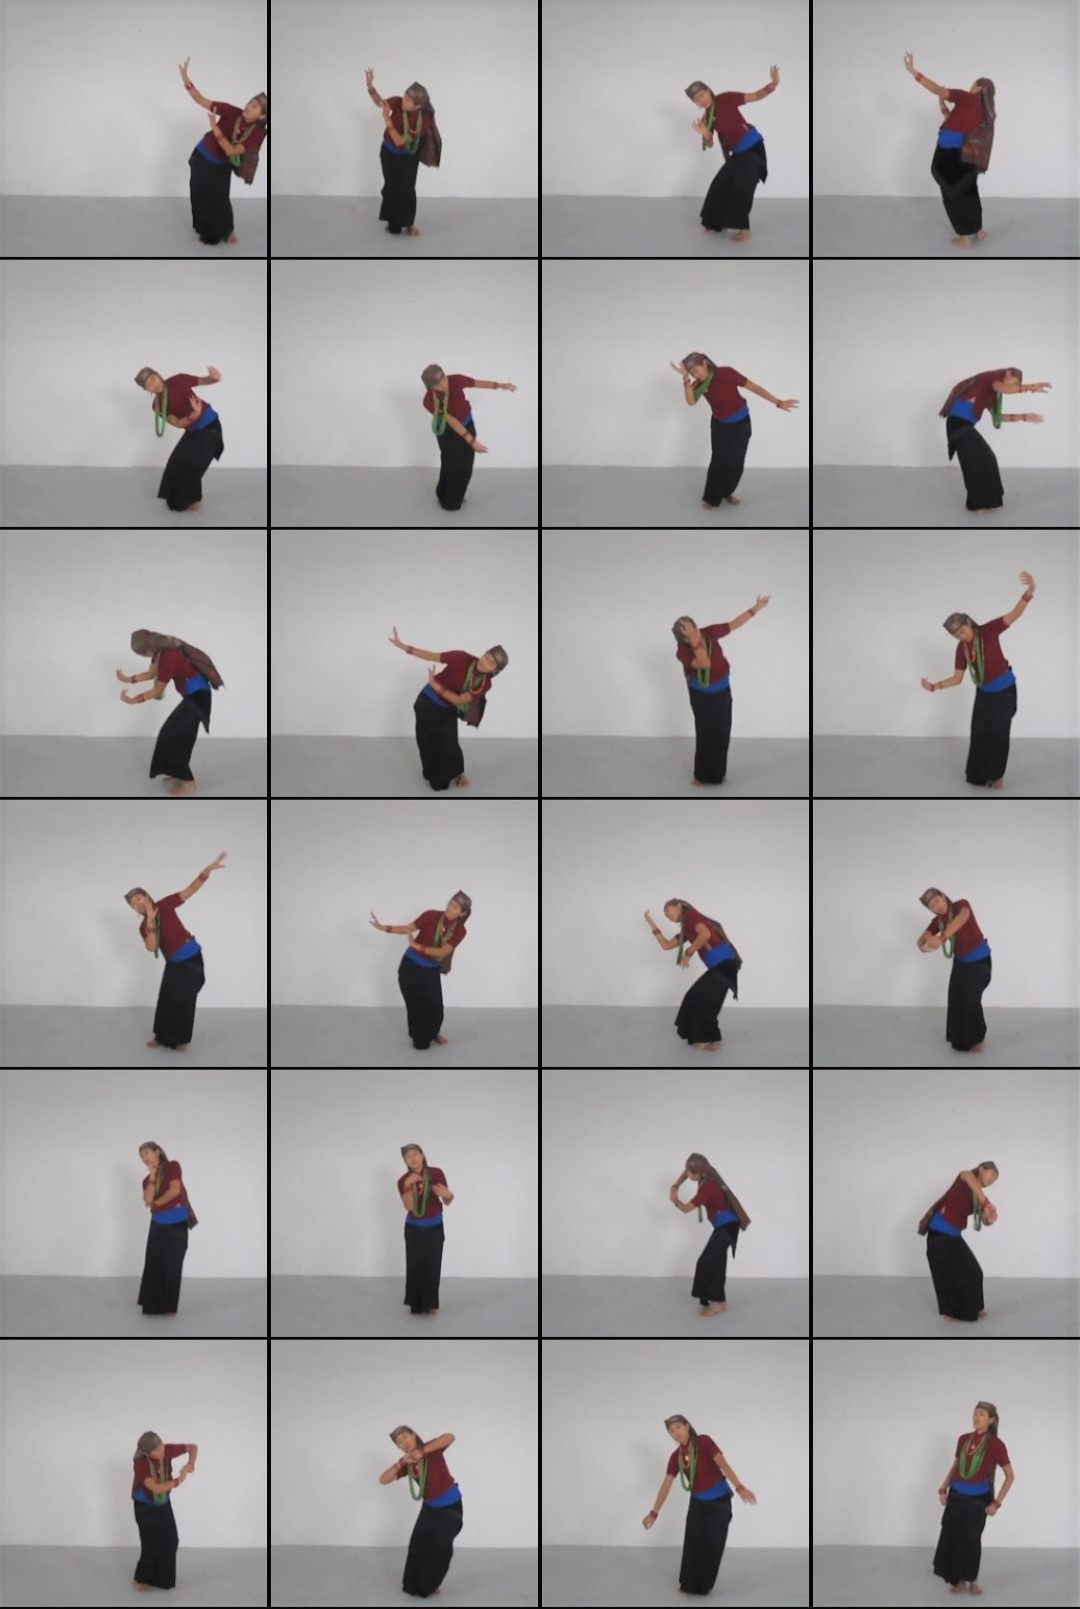 A 4x6 grid of images depicting the artist performing a Tamu/Gurung ghatu dance against a grey background.